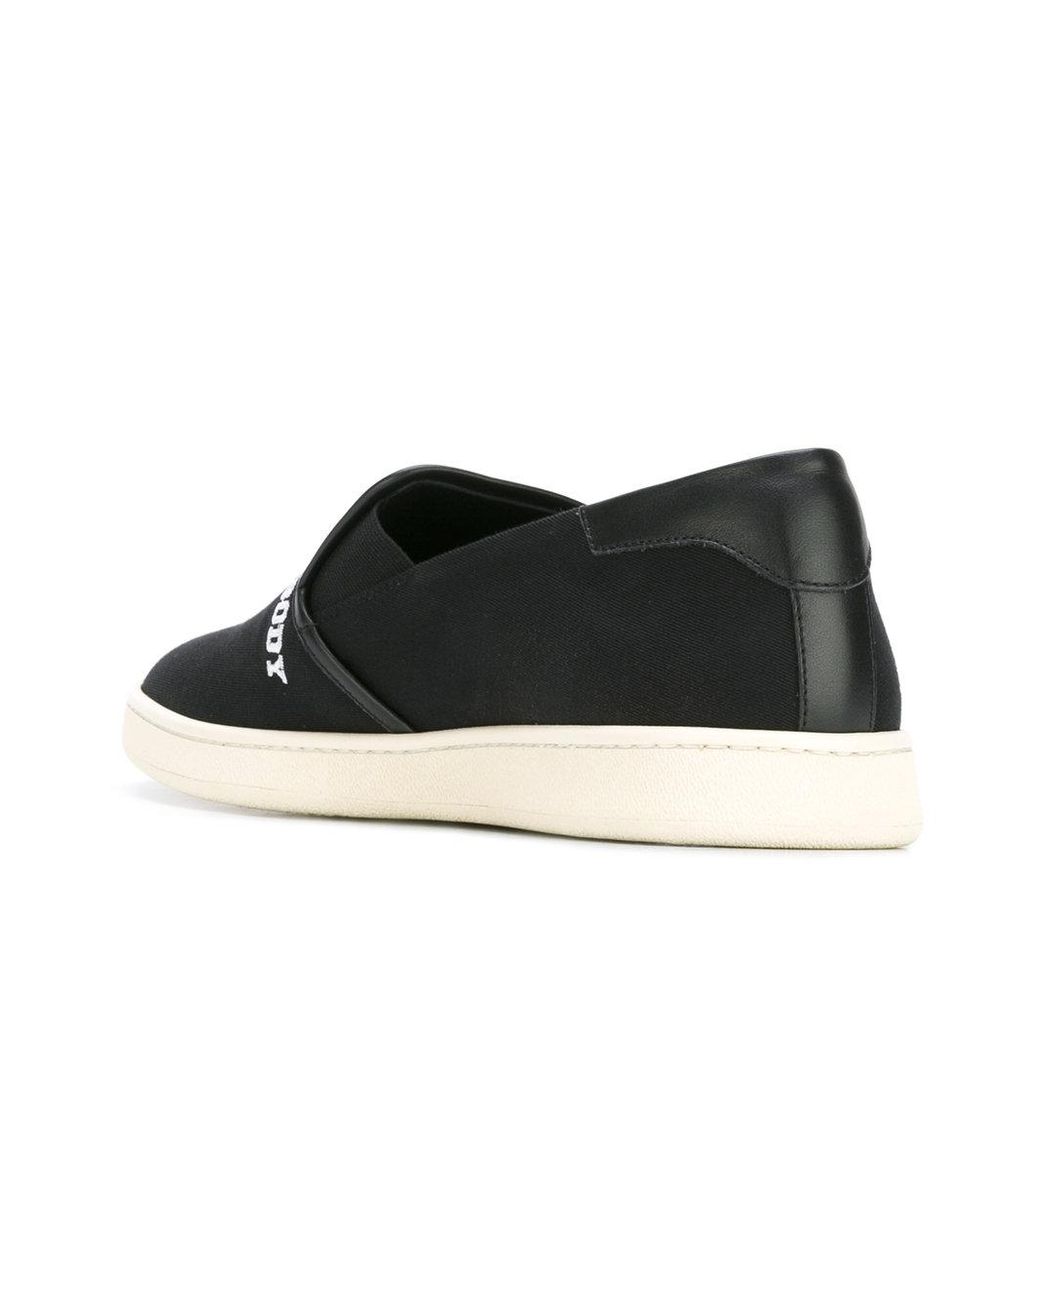 Palm Angels fuck You Embroidery Slip-on Sneakers in Black Lyst pic picture